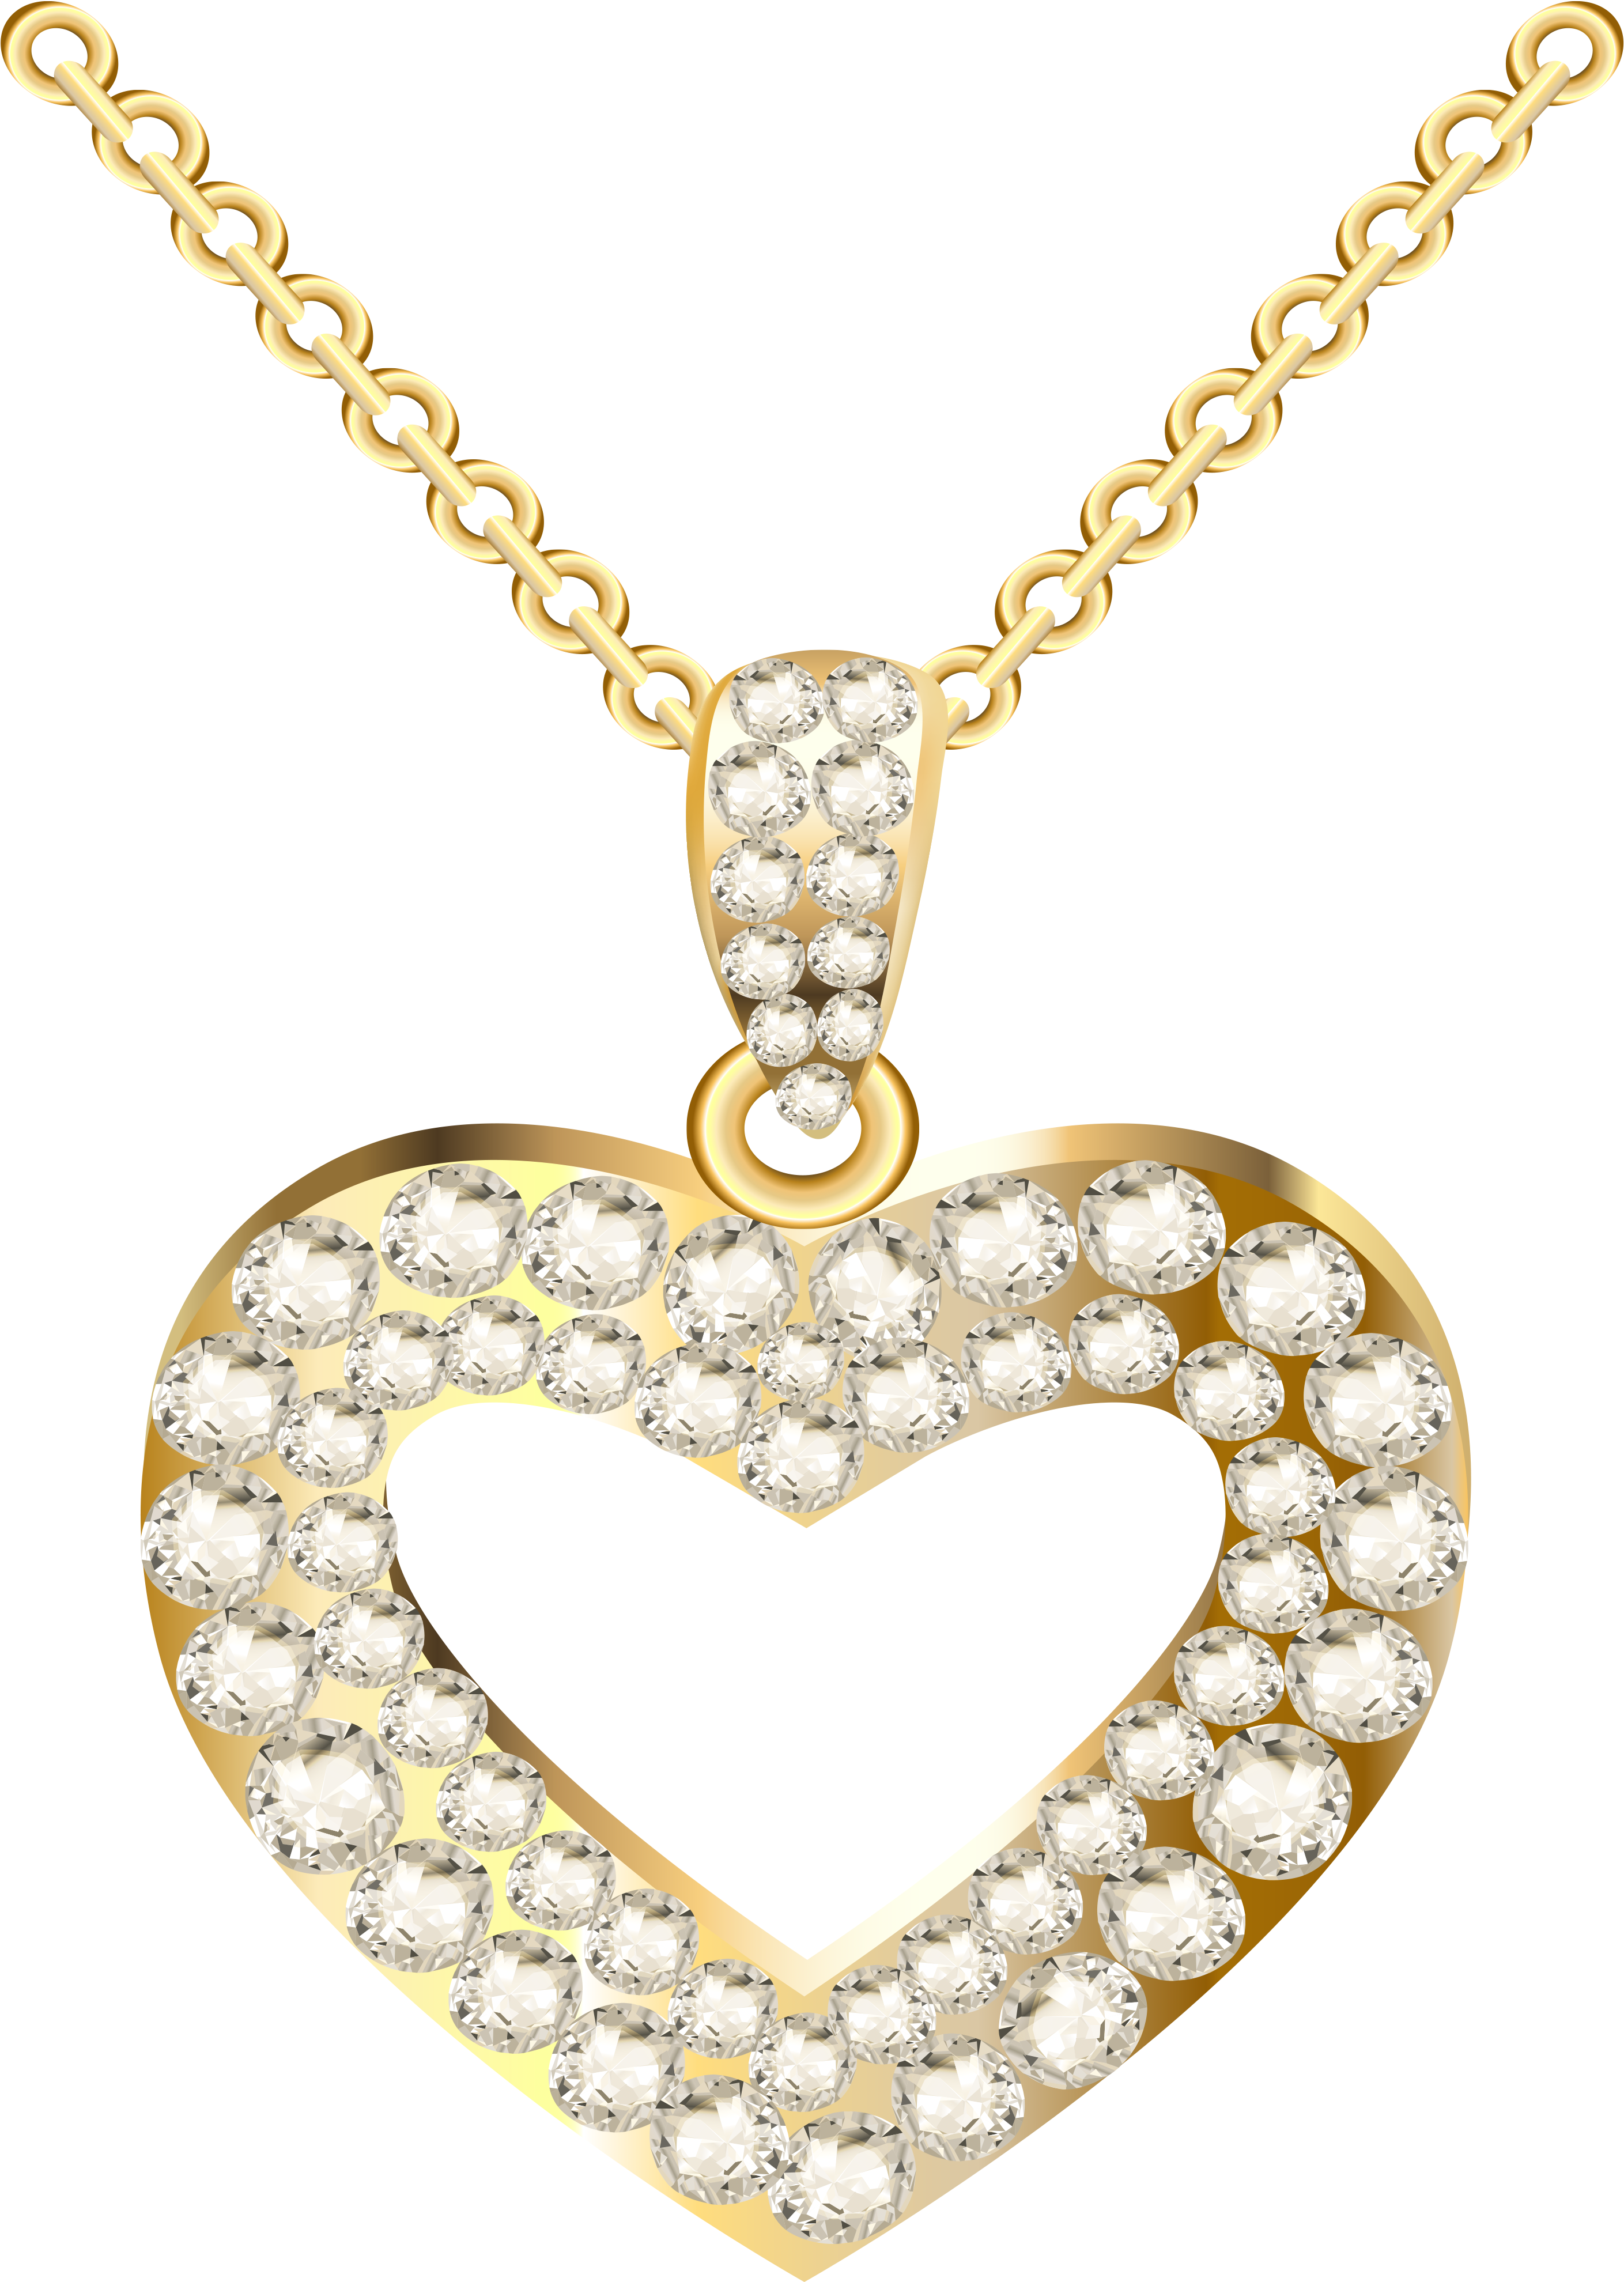 A Gold Heart With Diamonds On A Chain